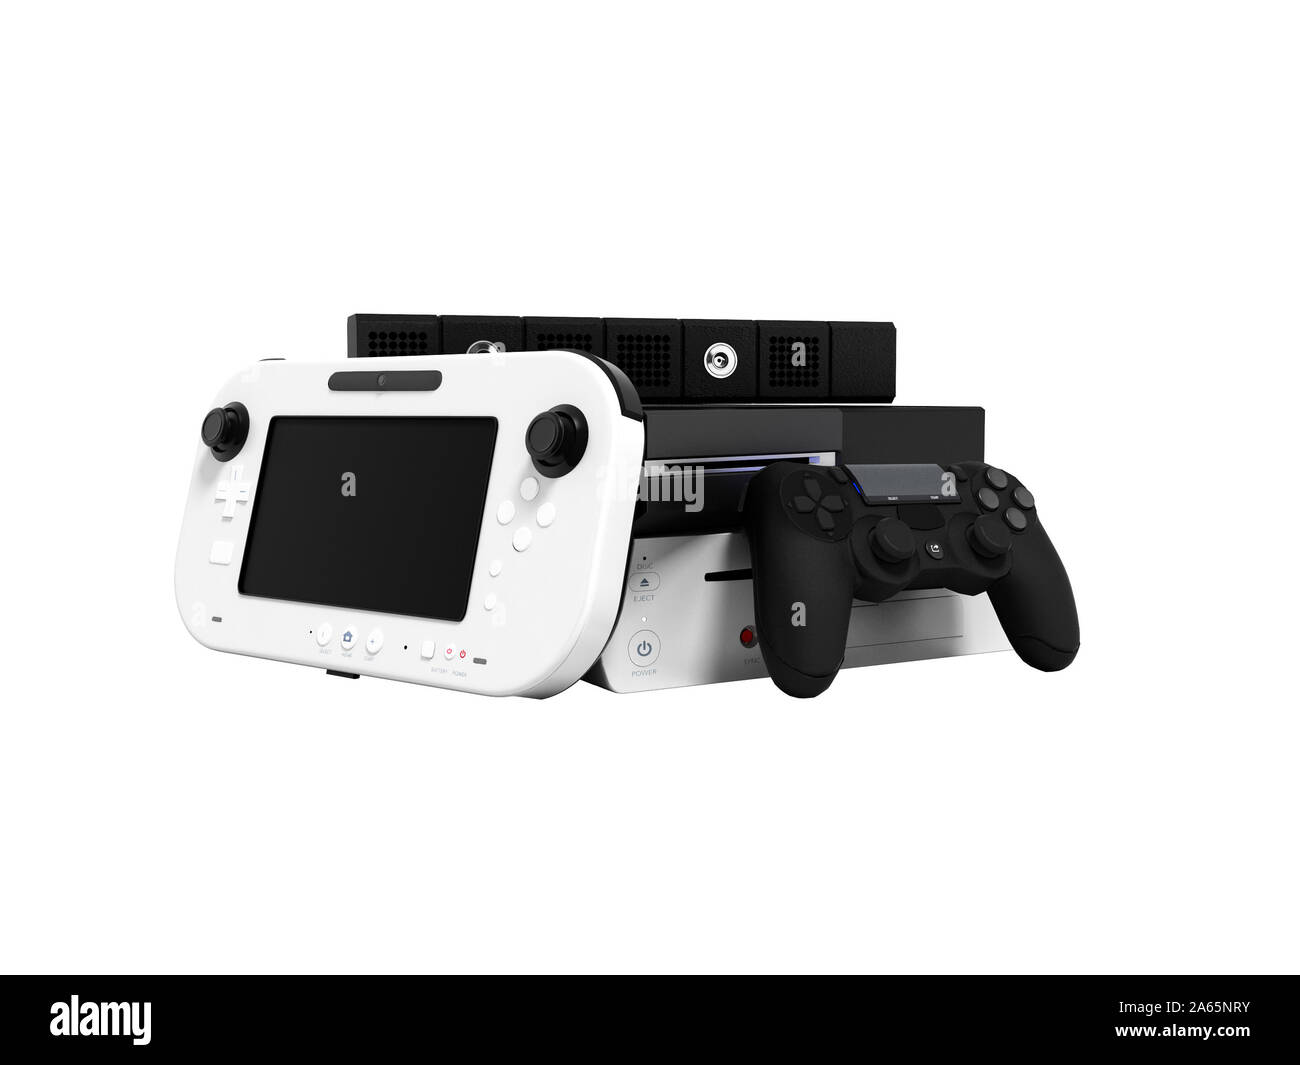 Concept of gaming consoles for games at home or on the street 3d render on white background no shadow Stock Photo